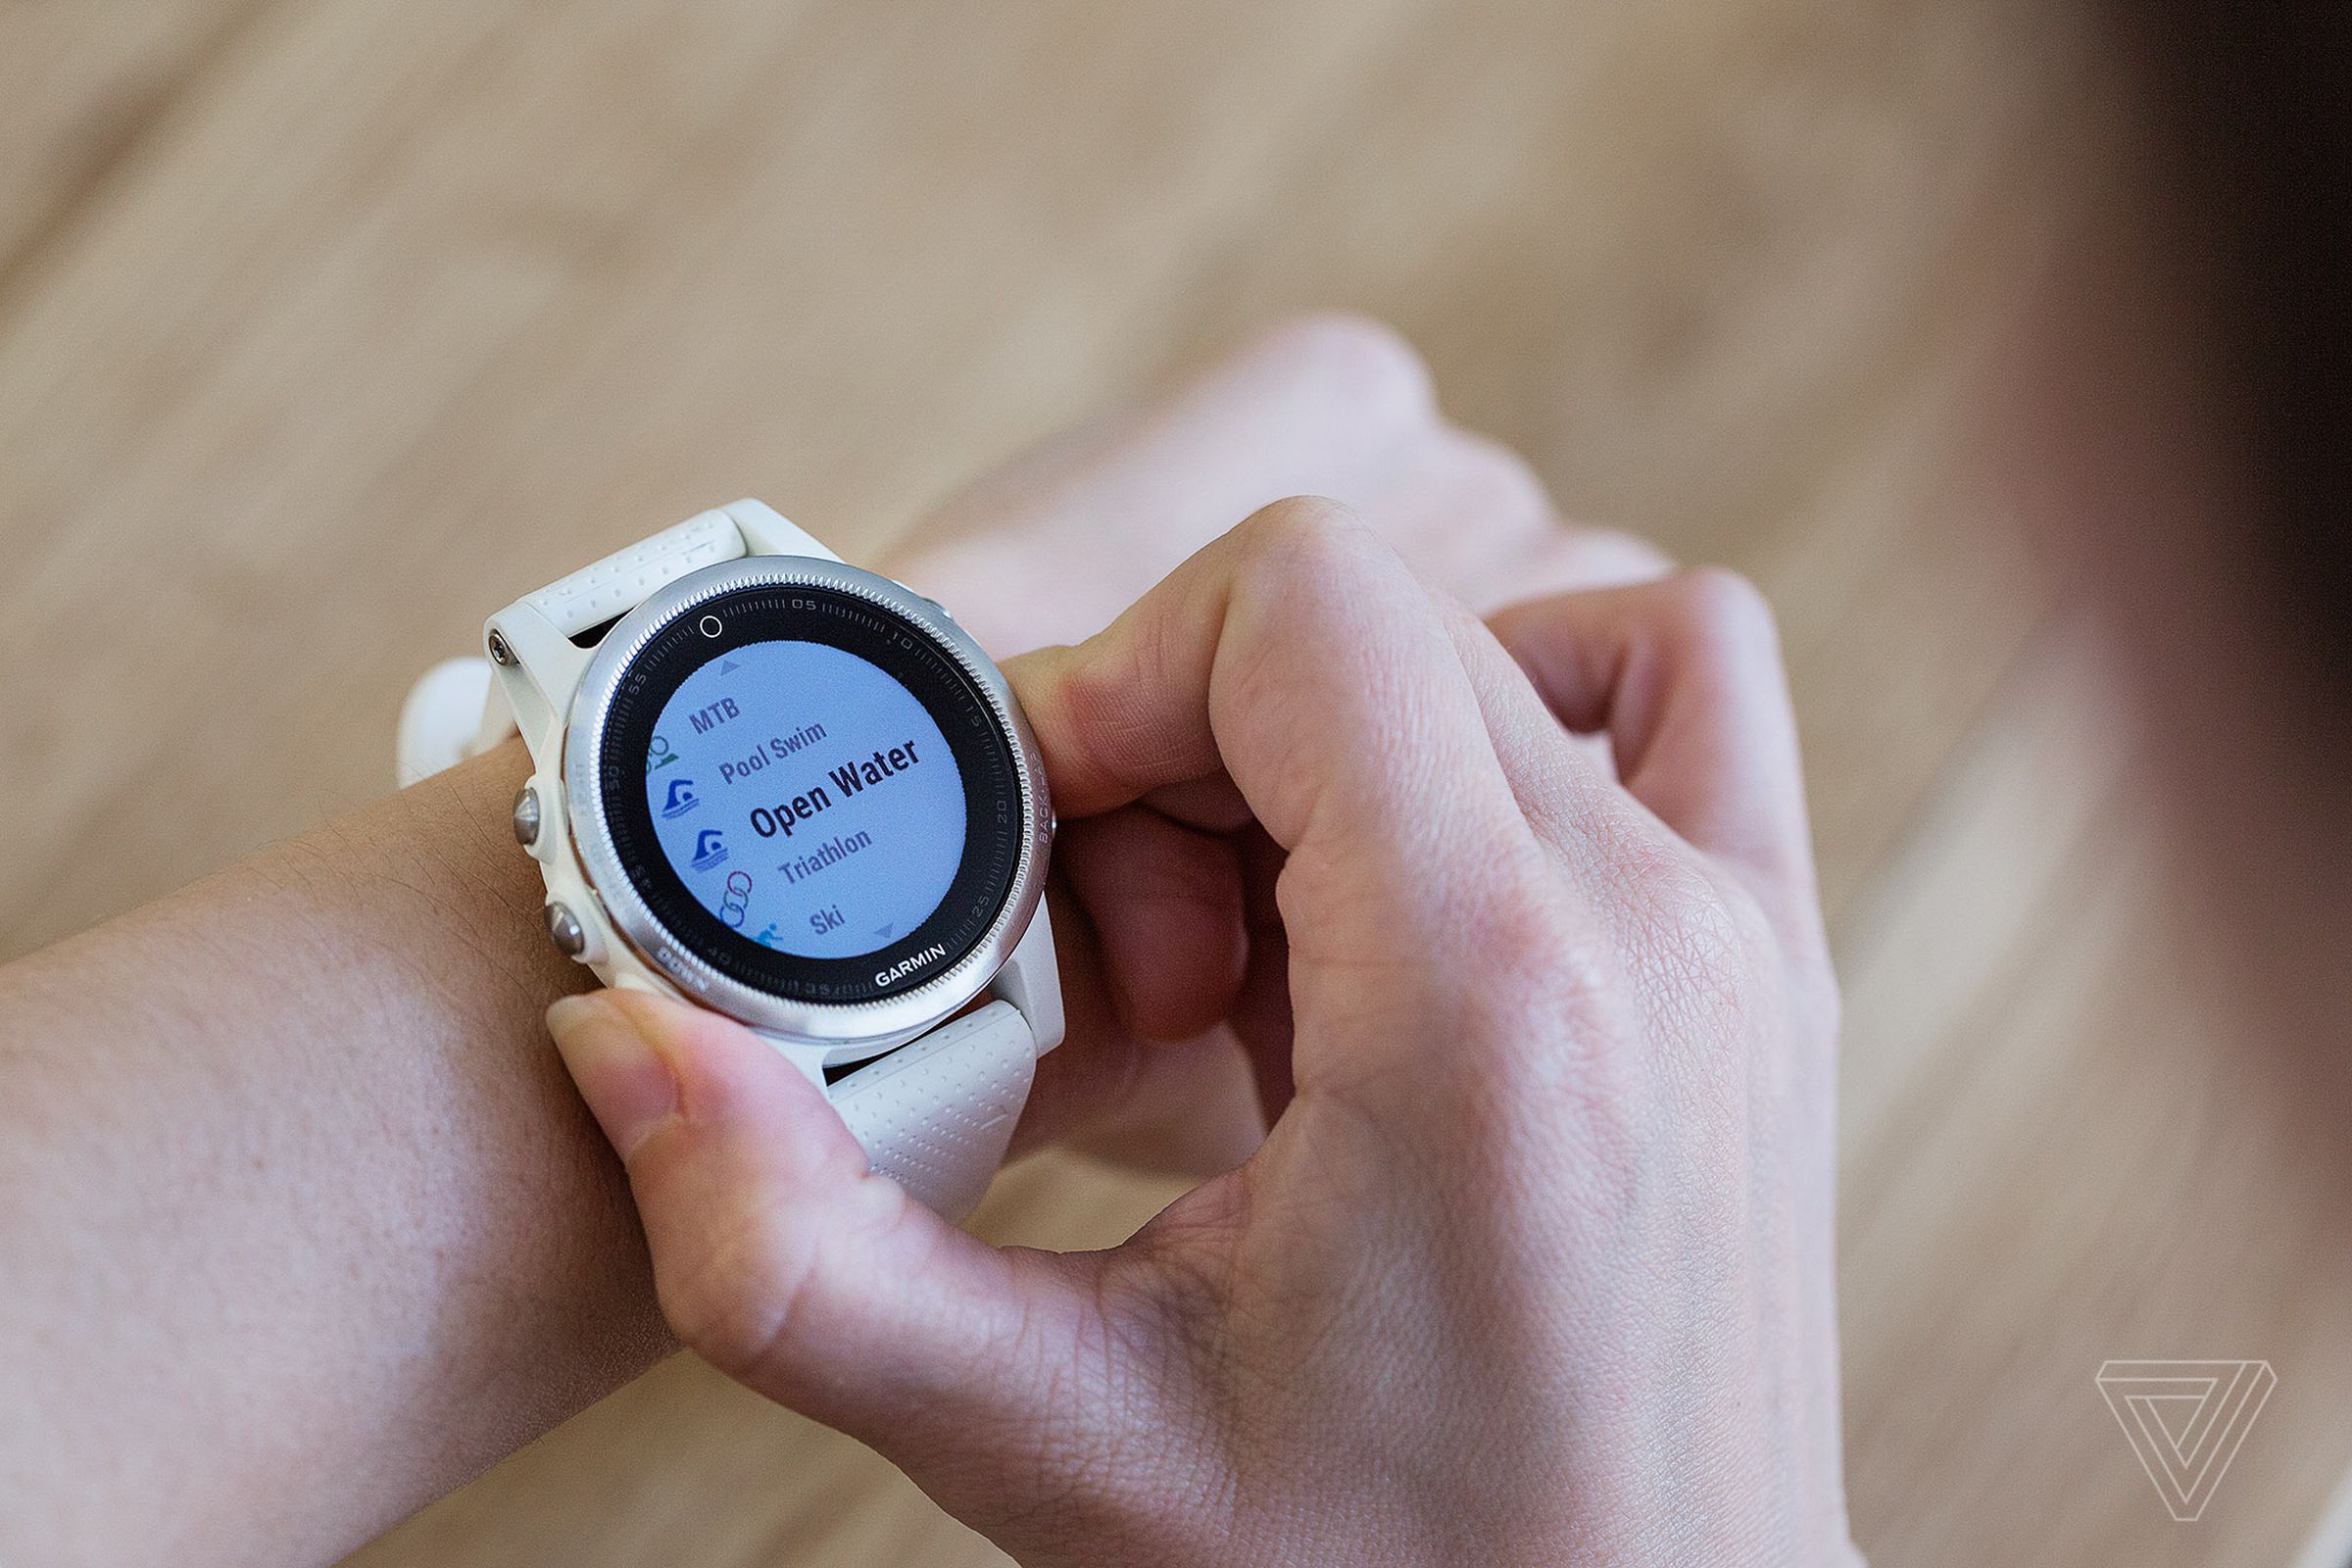 Garmin’s smartwatches are syncing again.